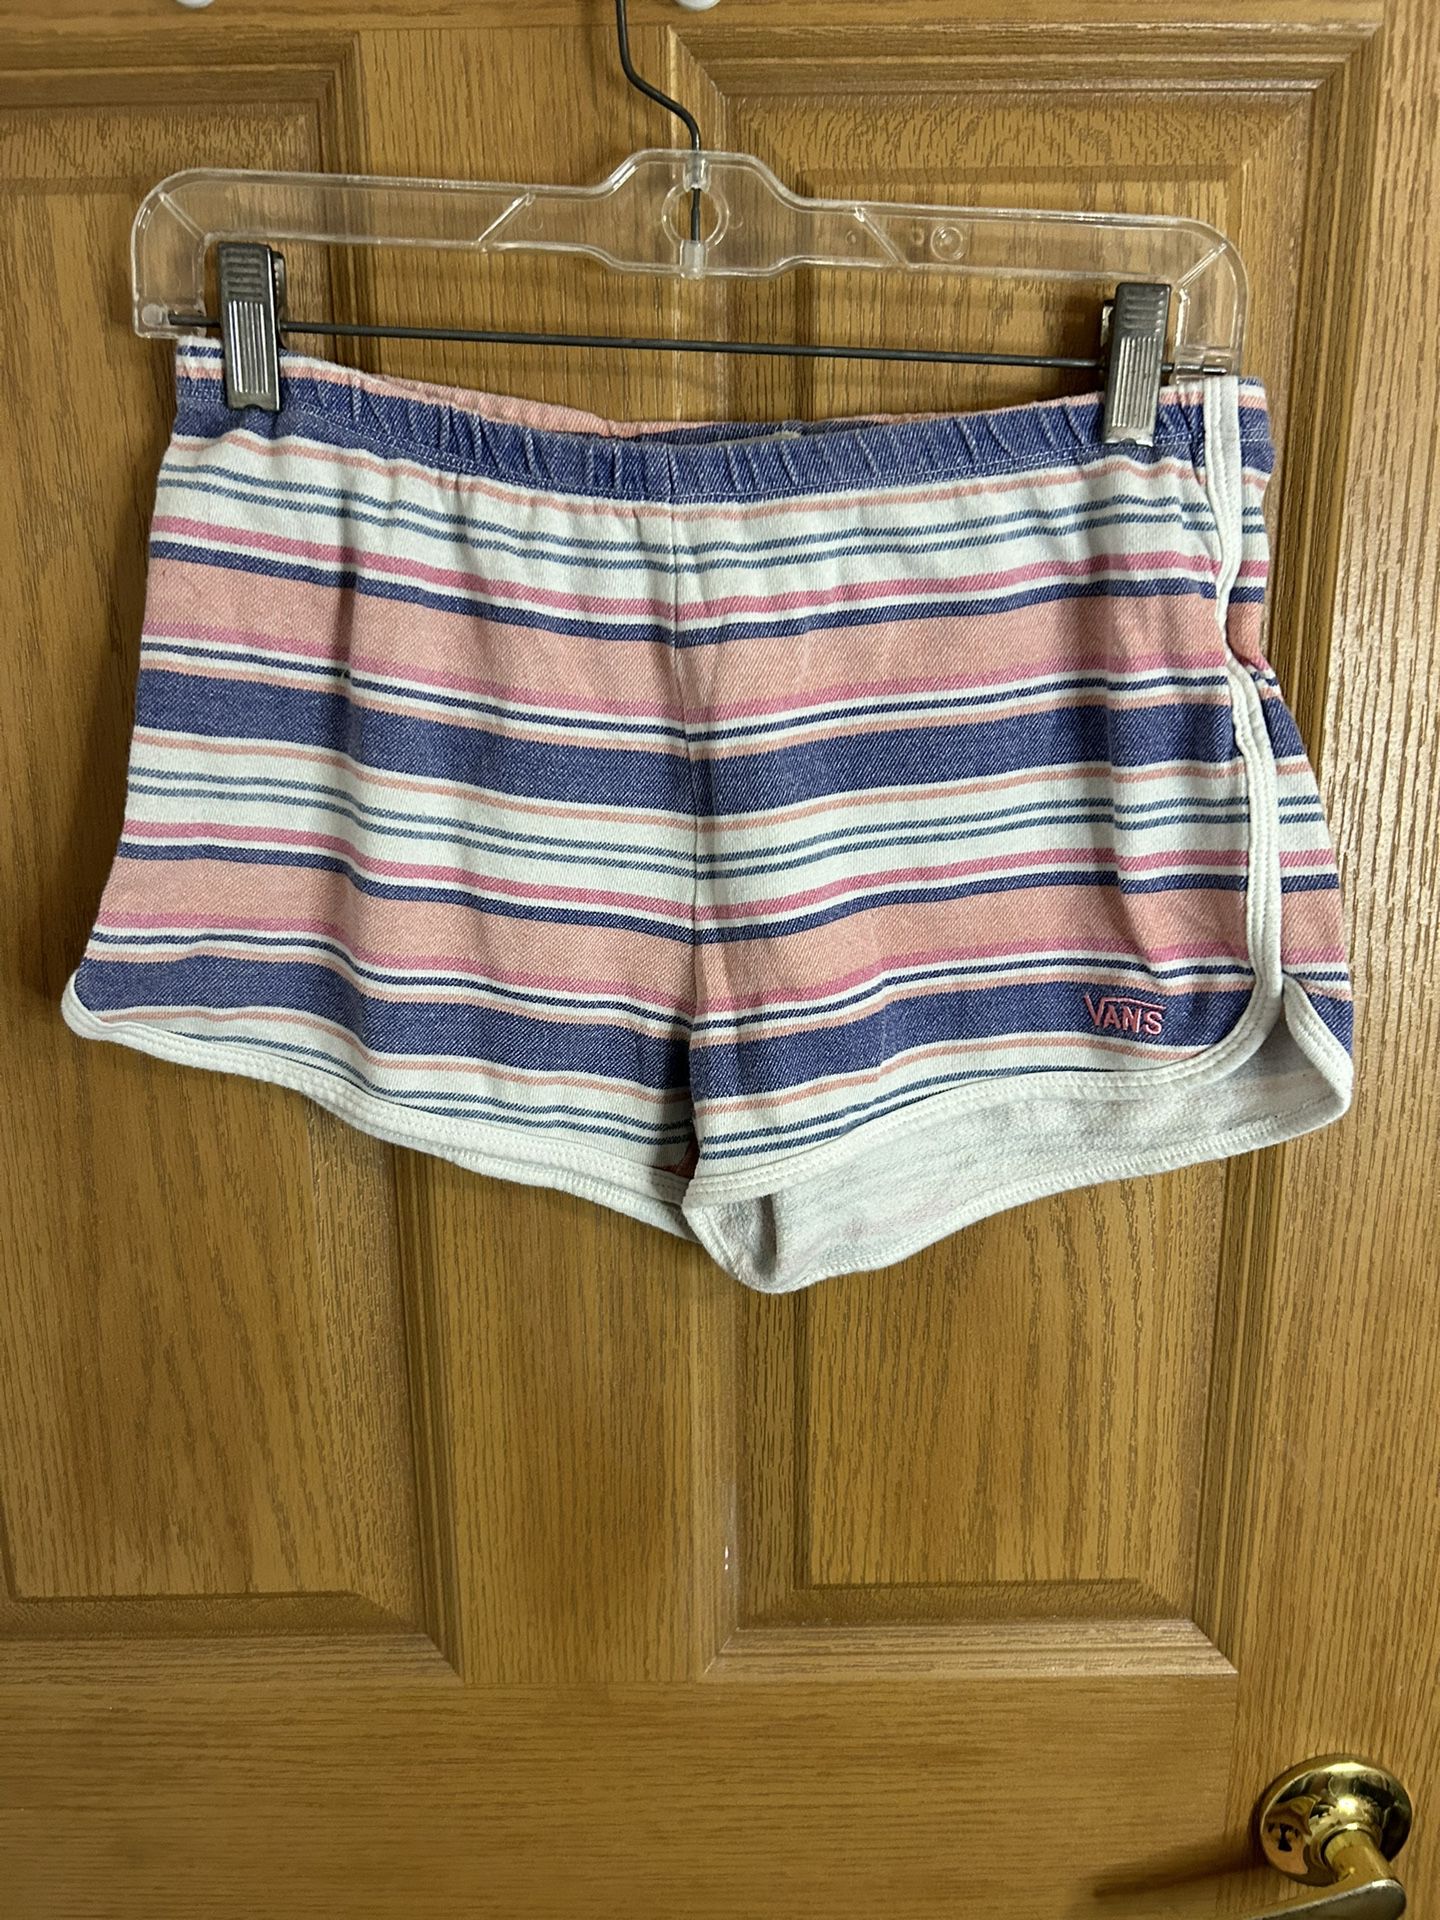 Vans Women’s Striped Cloth Shorts Size Small